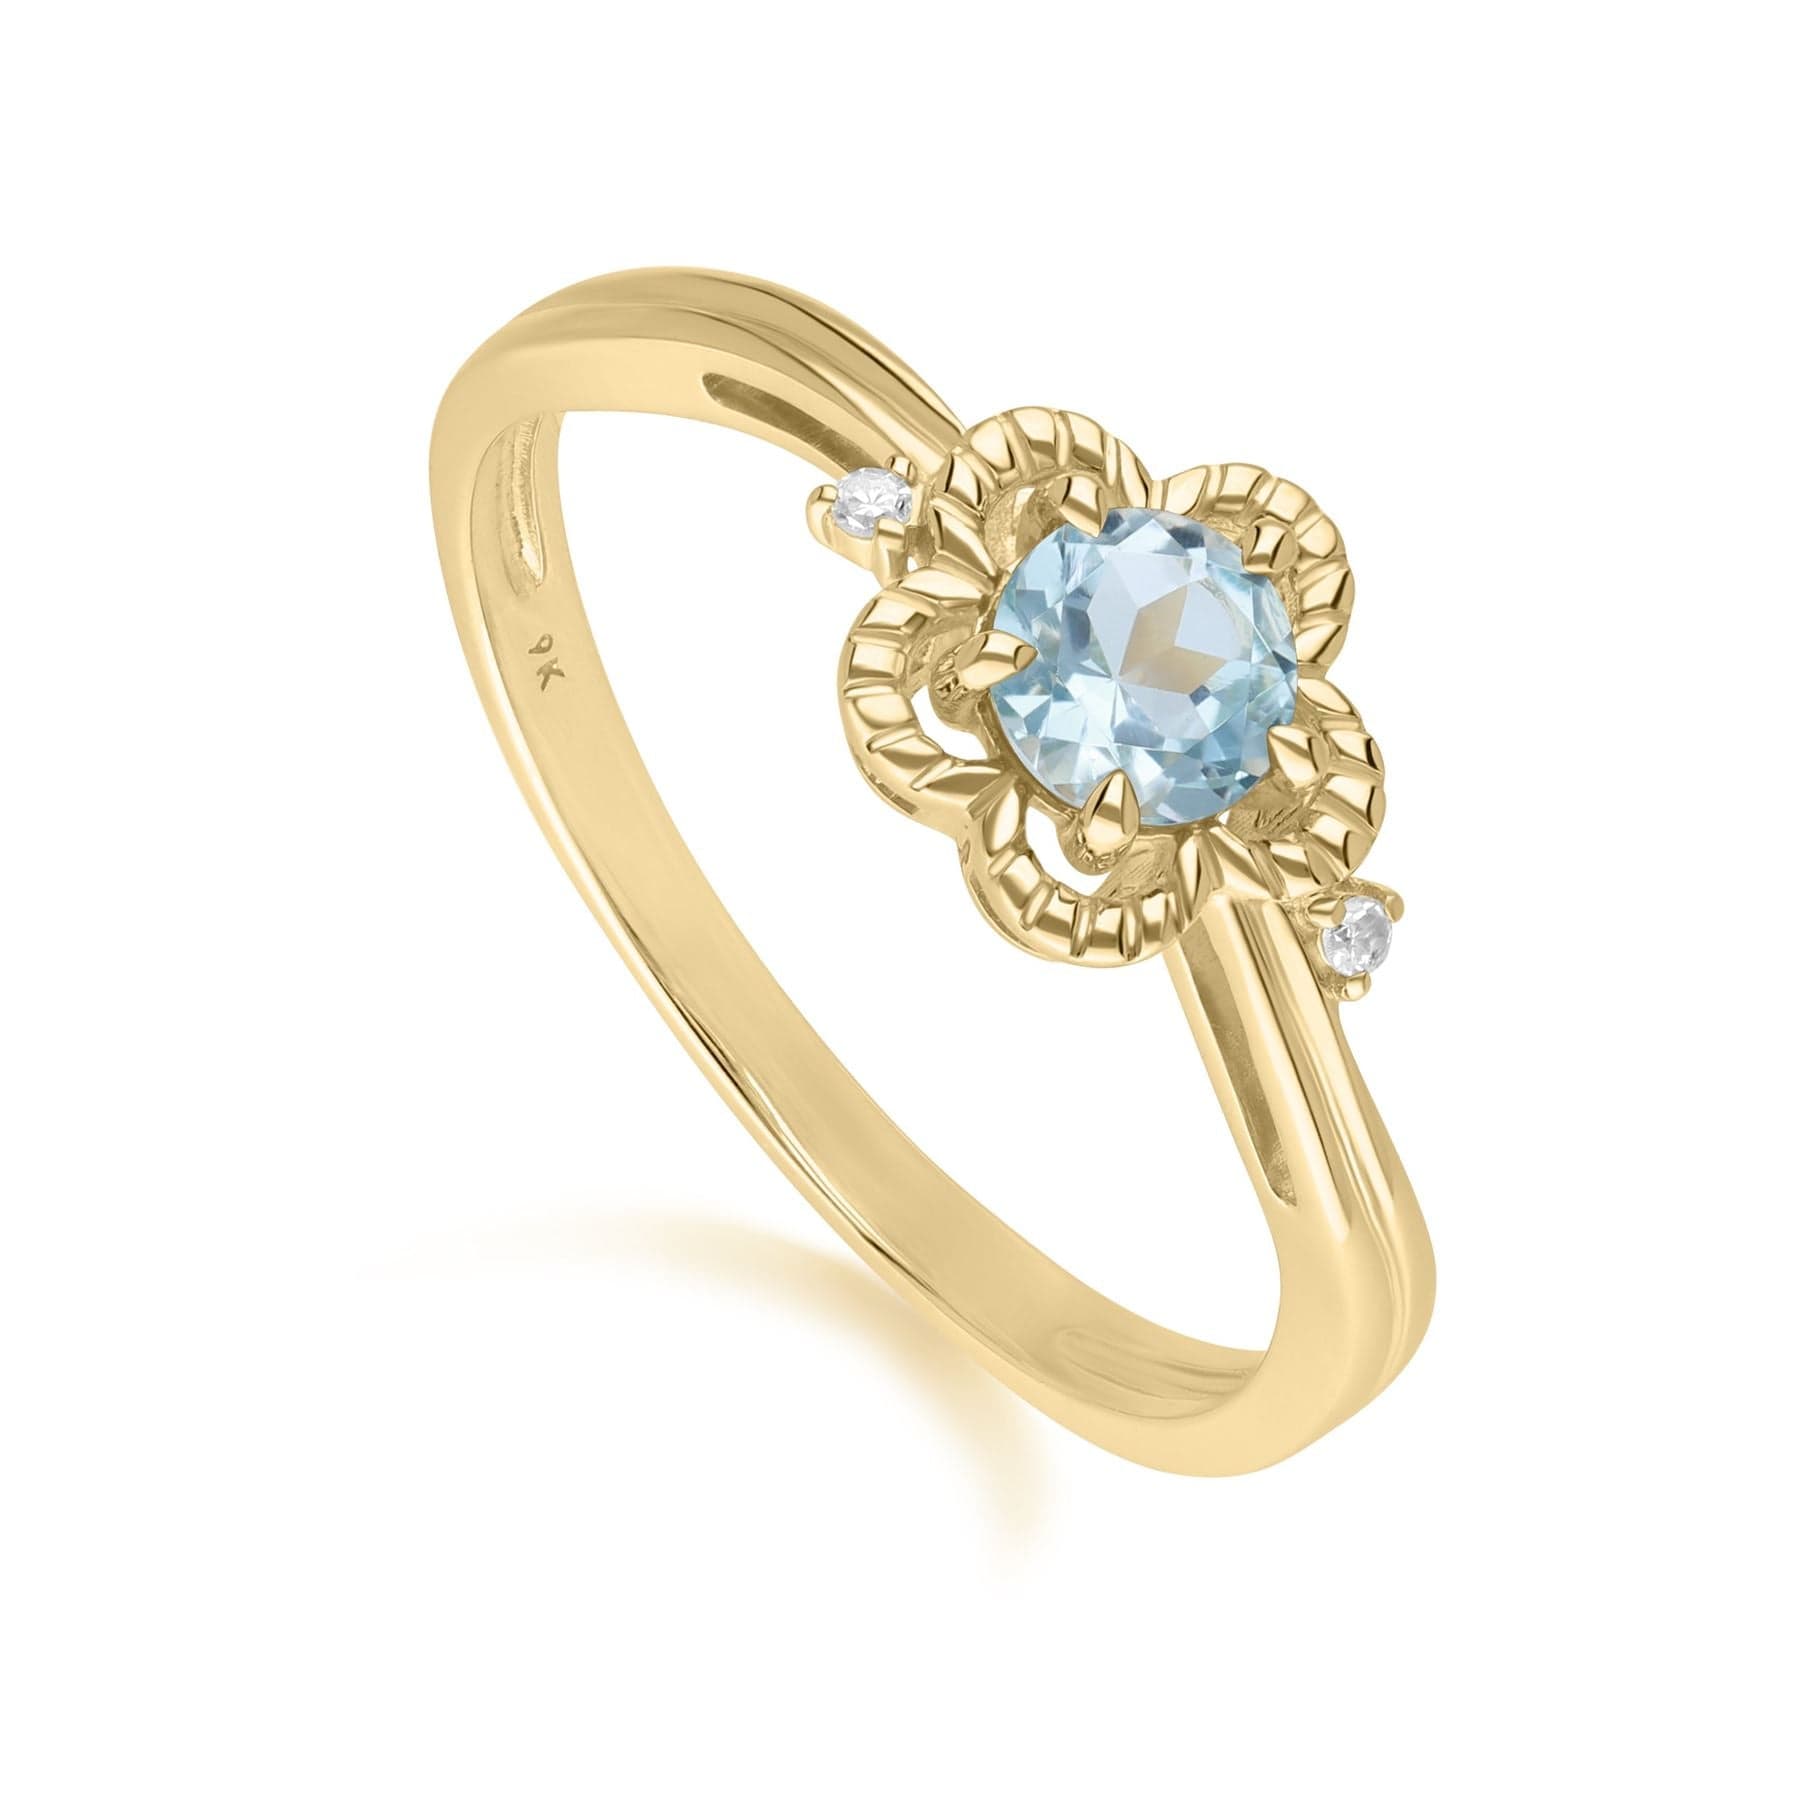 Image of Floral Round Blue Topaz & Diamond Ring in 9ct Yellow Gold